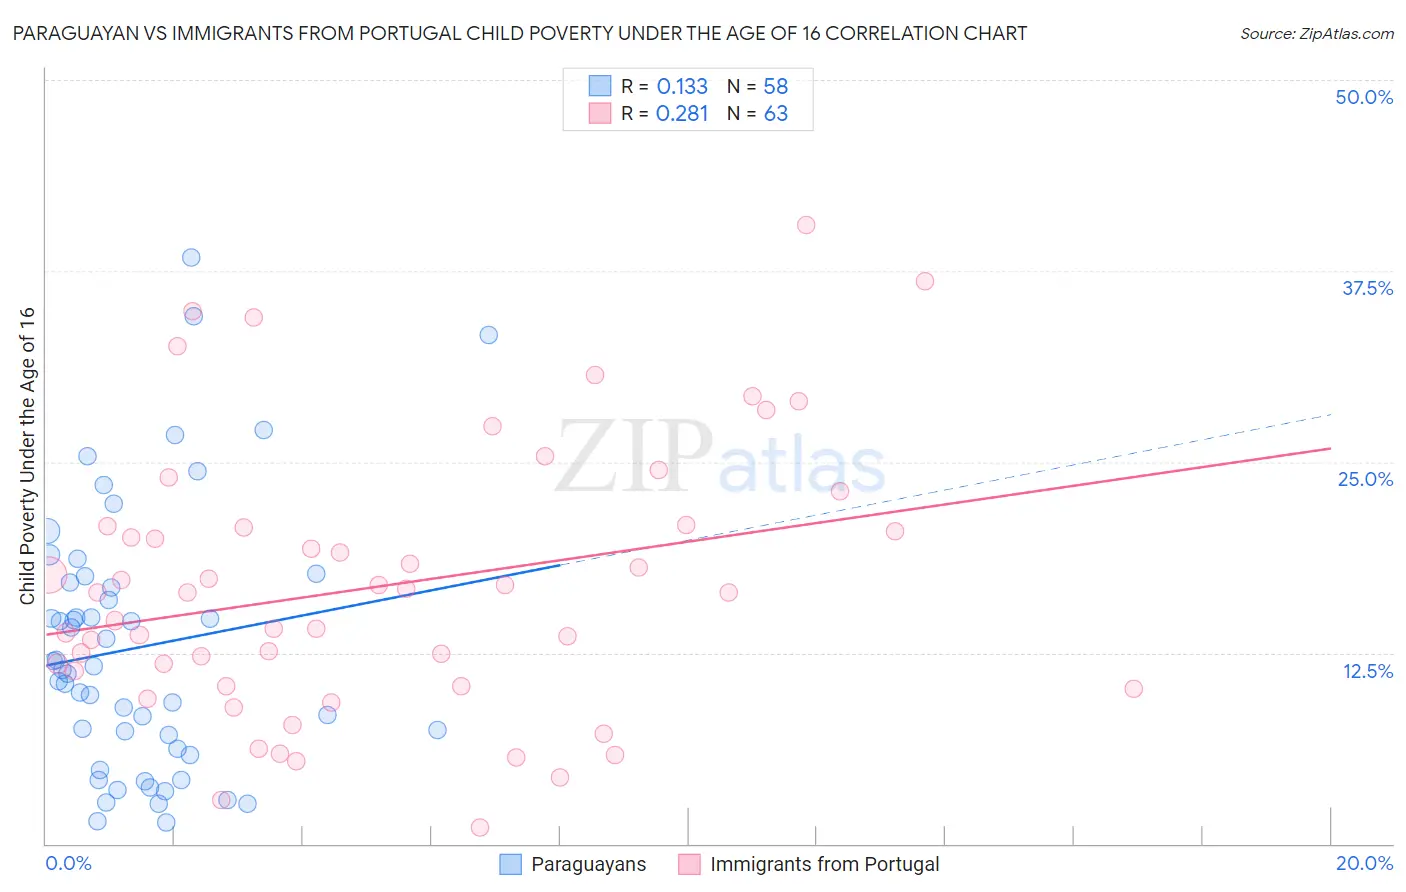 Paraguayan vs Immigrants from Portugal Child Poverty Under the Age of 16